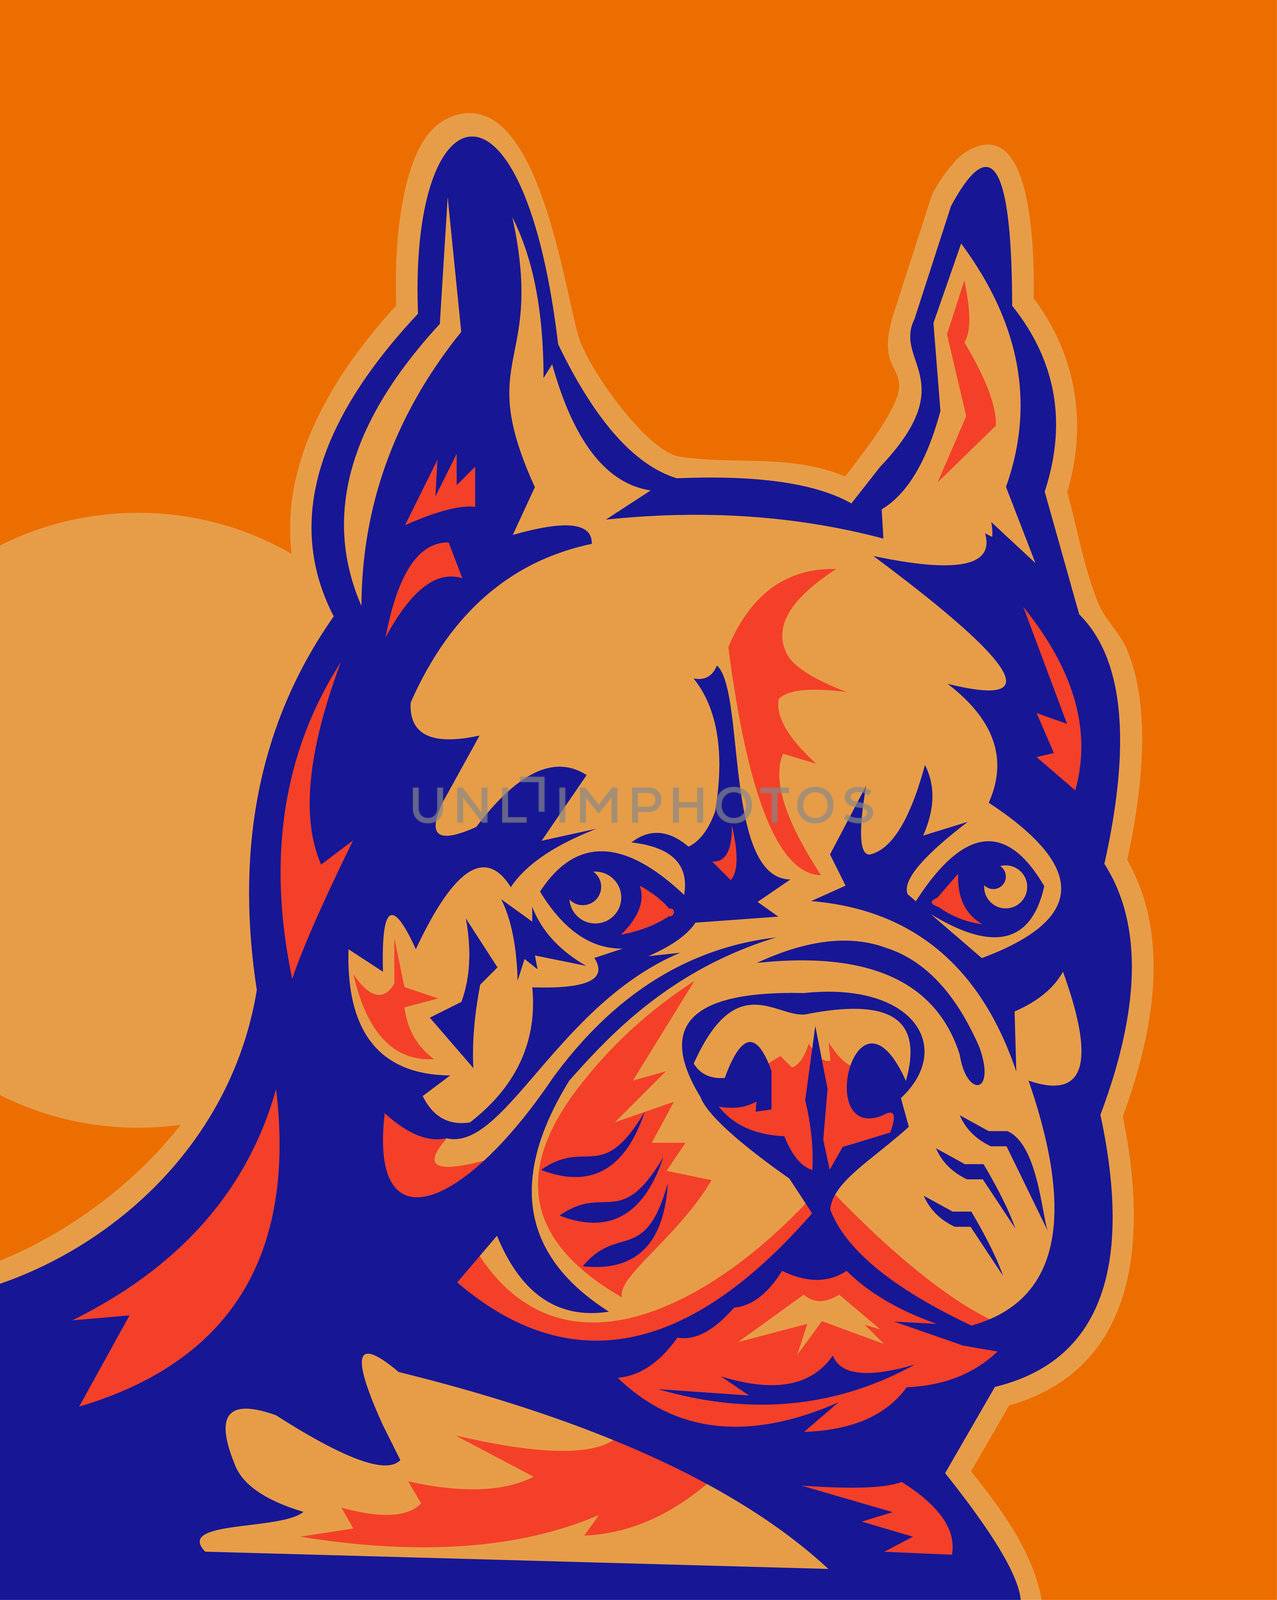 retro style vector illustration of a French Bulldog portrait looking to front. The dogs are commonly called the Frenchie and are nicknamed "clowns" and "frog dogs".